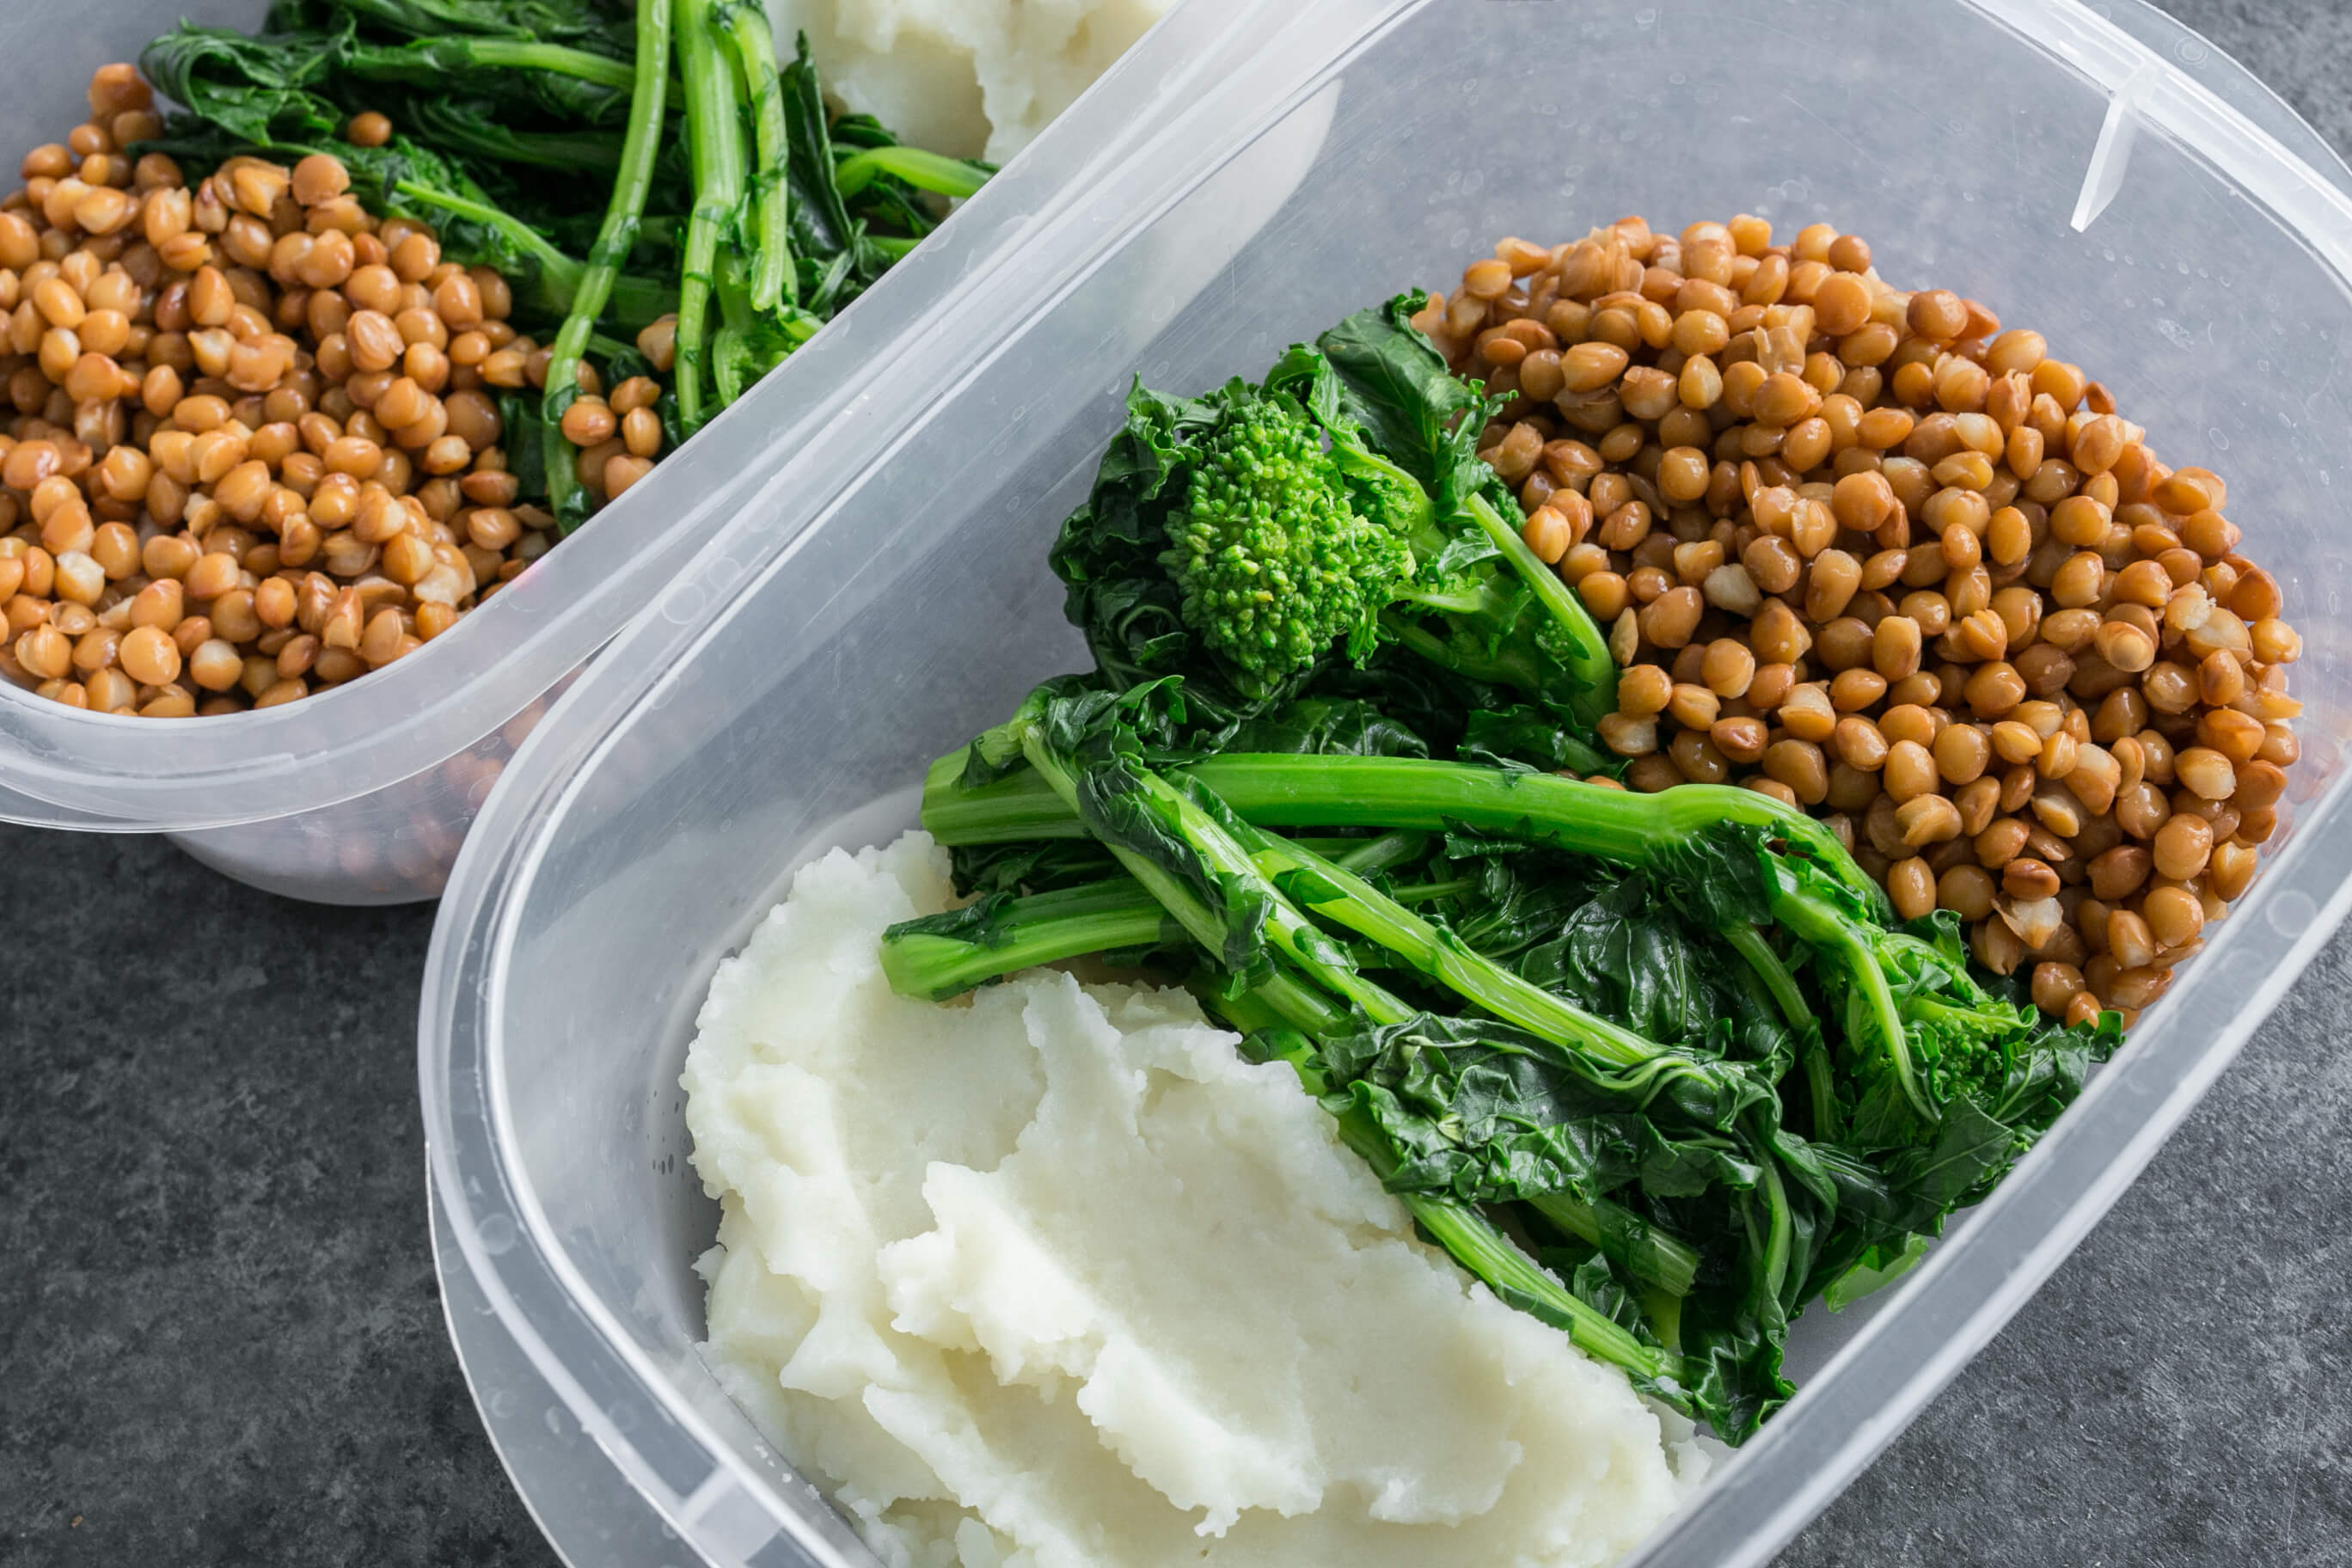 20 Low-Fat Oil-Free Meals Your Clients Will Love: Lentils, Rapini & Mashed Potatoes